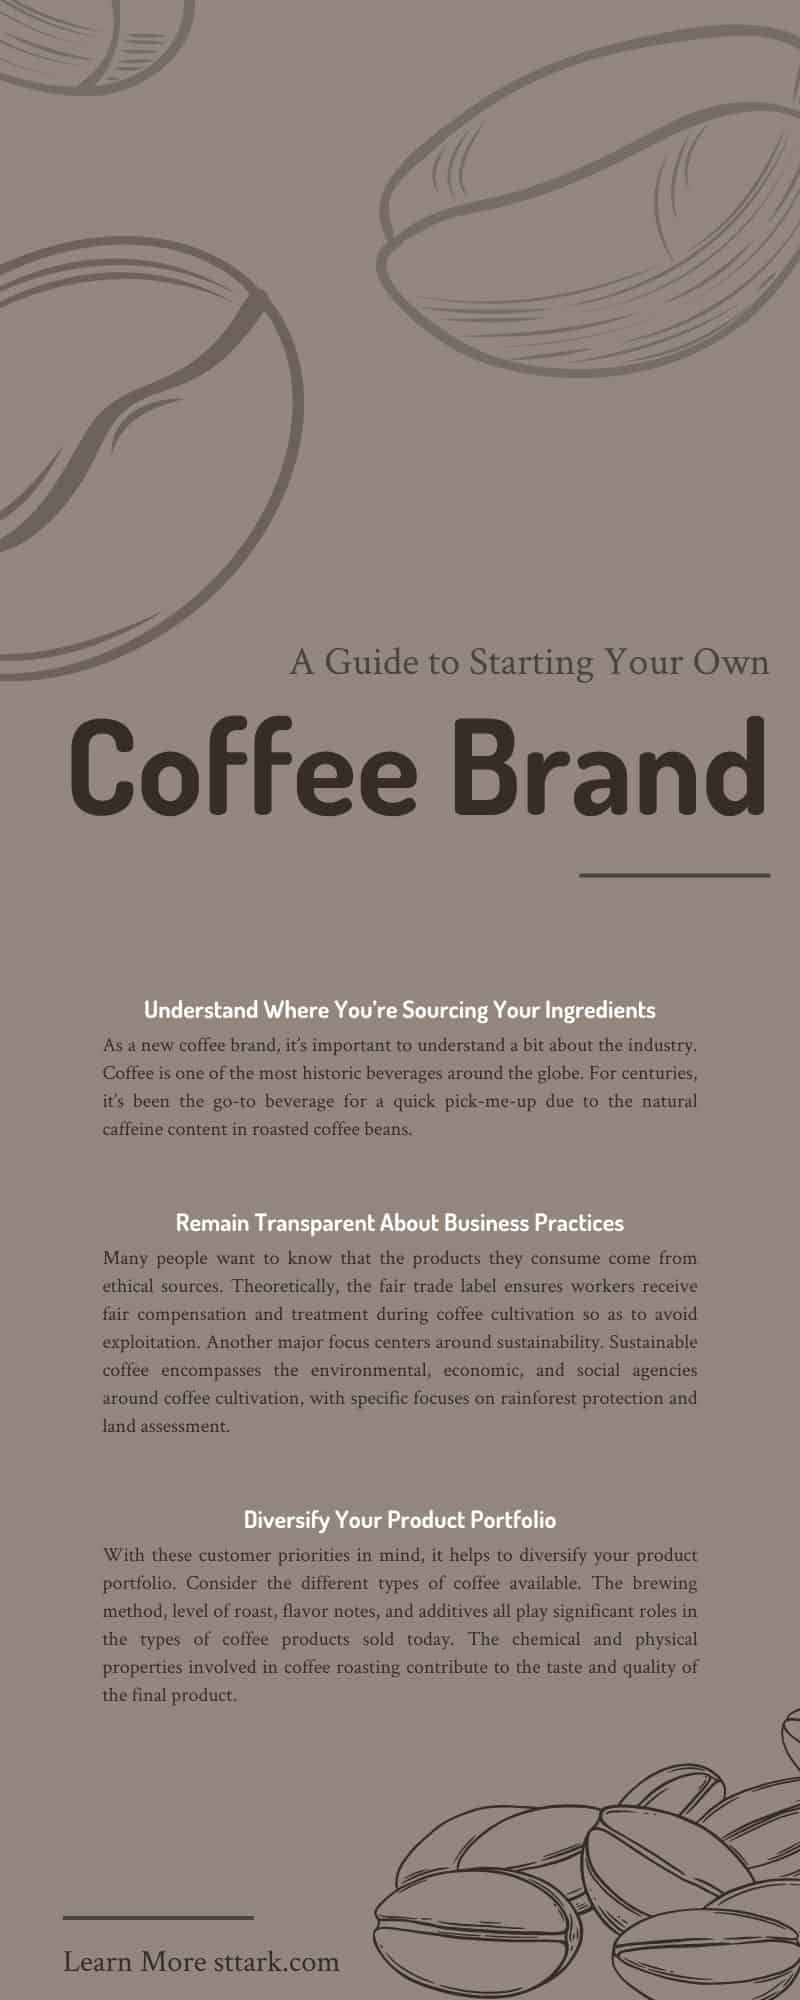 A Guide to Starting Your Own Coffee Brand